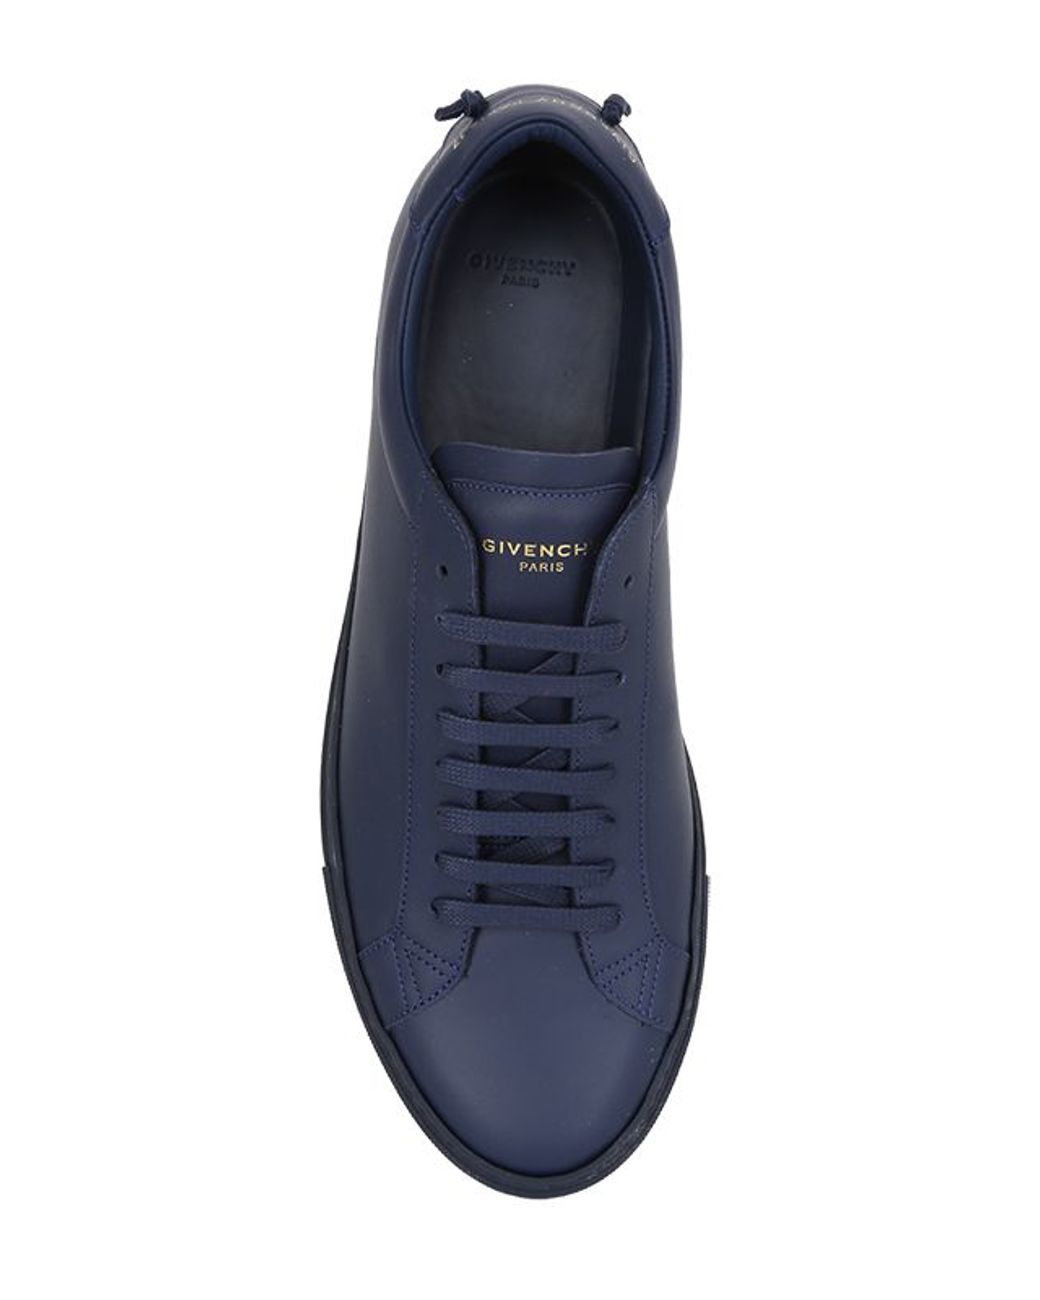 Givenchy Urban Street Leather Low-Top Sneakers in Blue Lyst